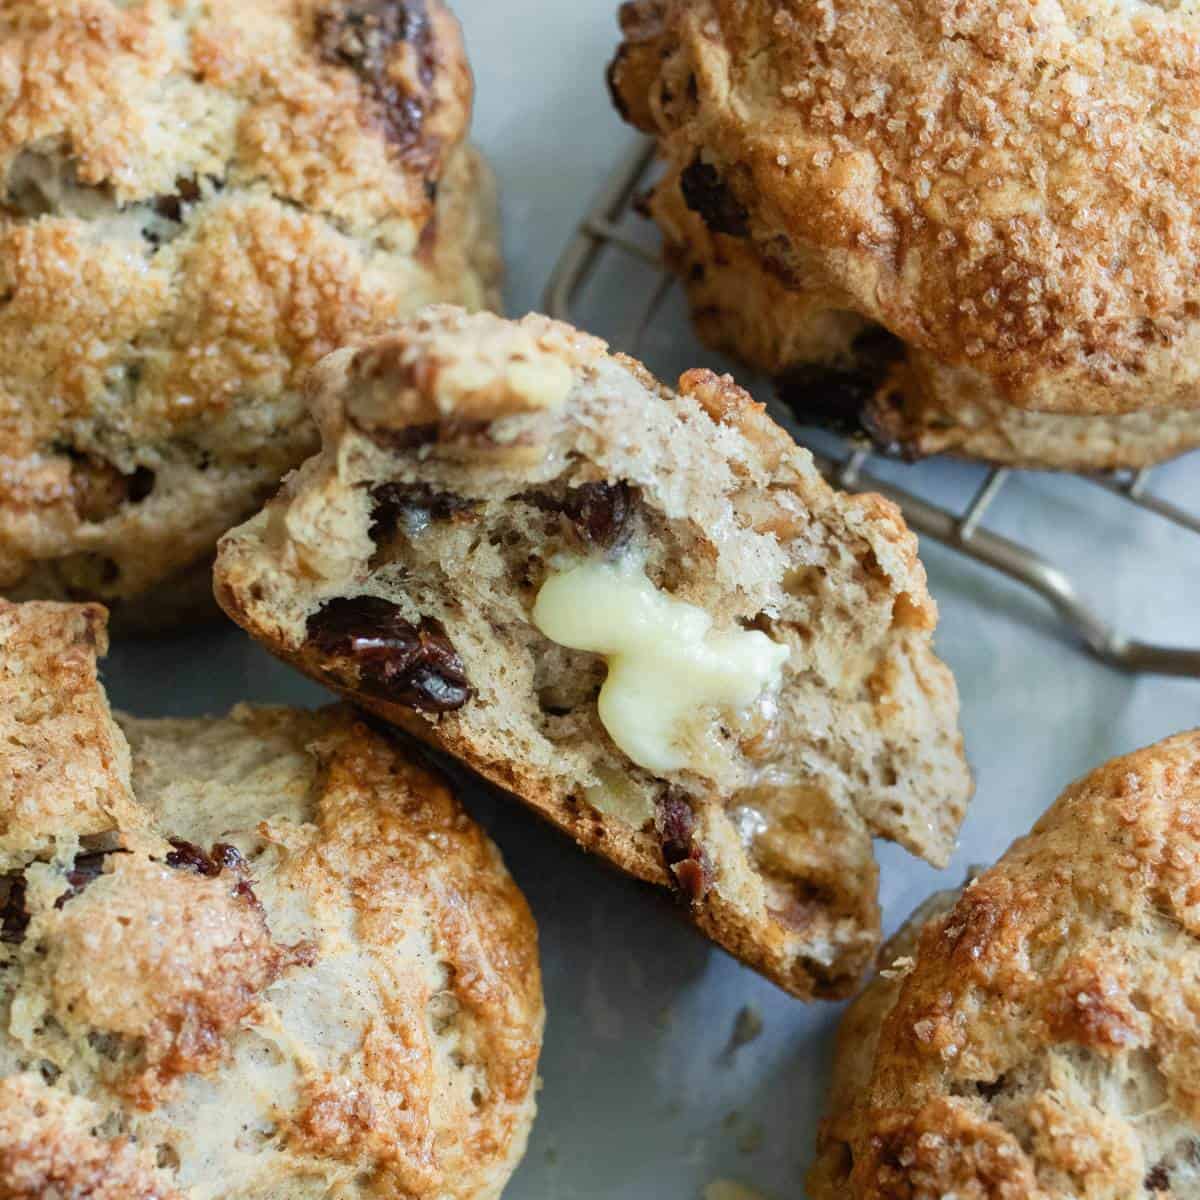 Butter melting on a scone half around other scones.